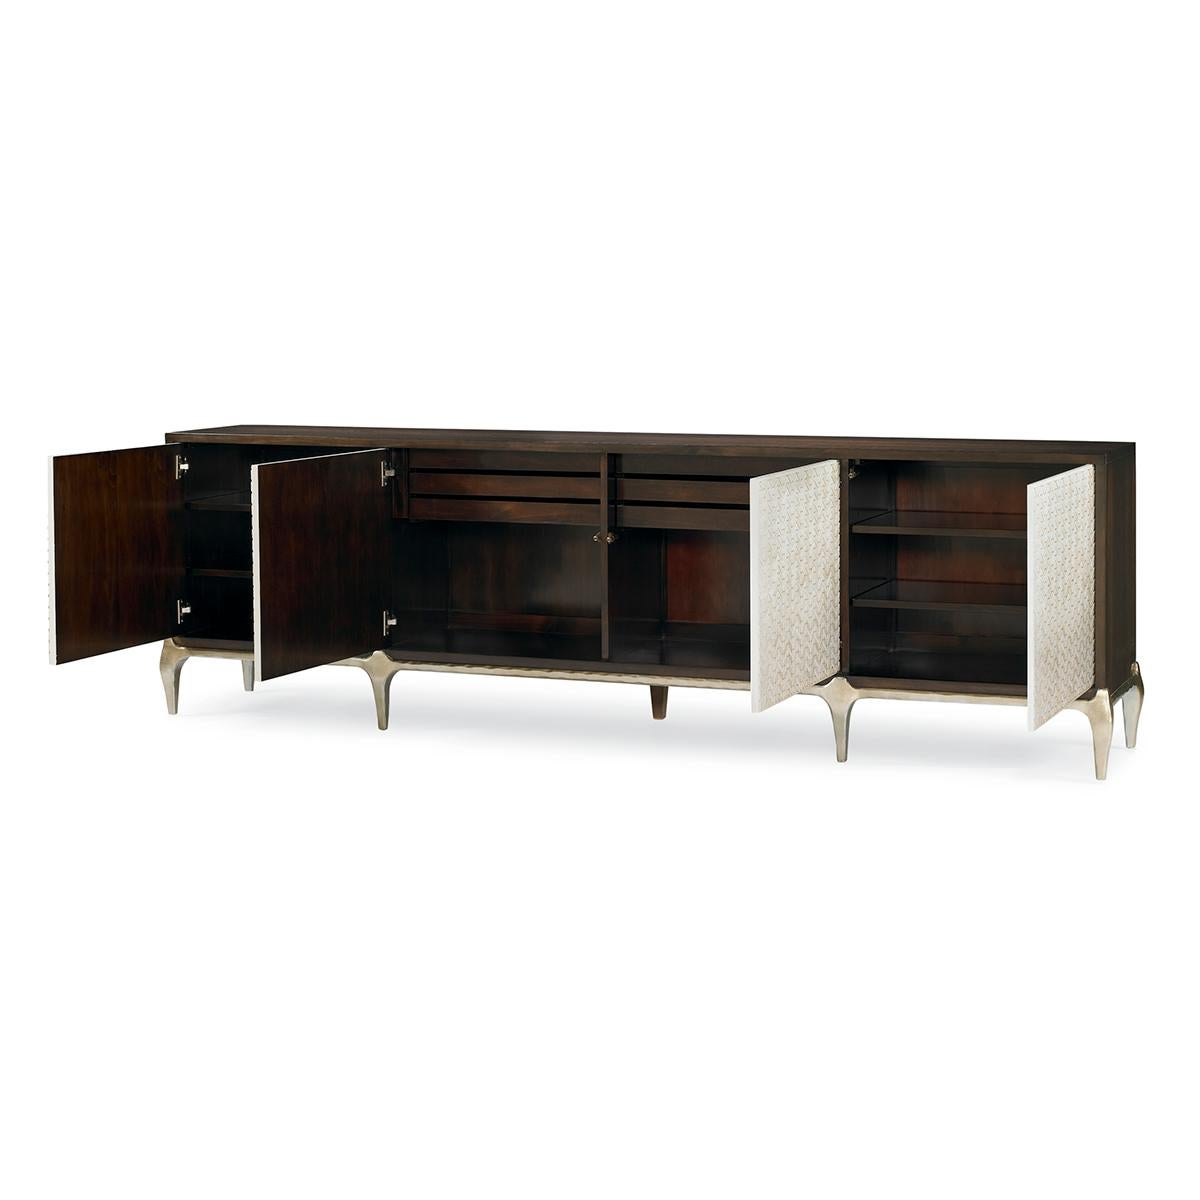 Art Deco long cabinet, at 100-inches wide, there couldn’t be a more dramatic centerpiece for both entertainment and design enthusiasts. The face of this cabinet is sure to capture everyone’s attention. Each of the four touch latch doors features